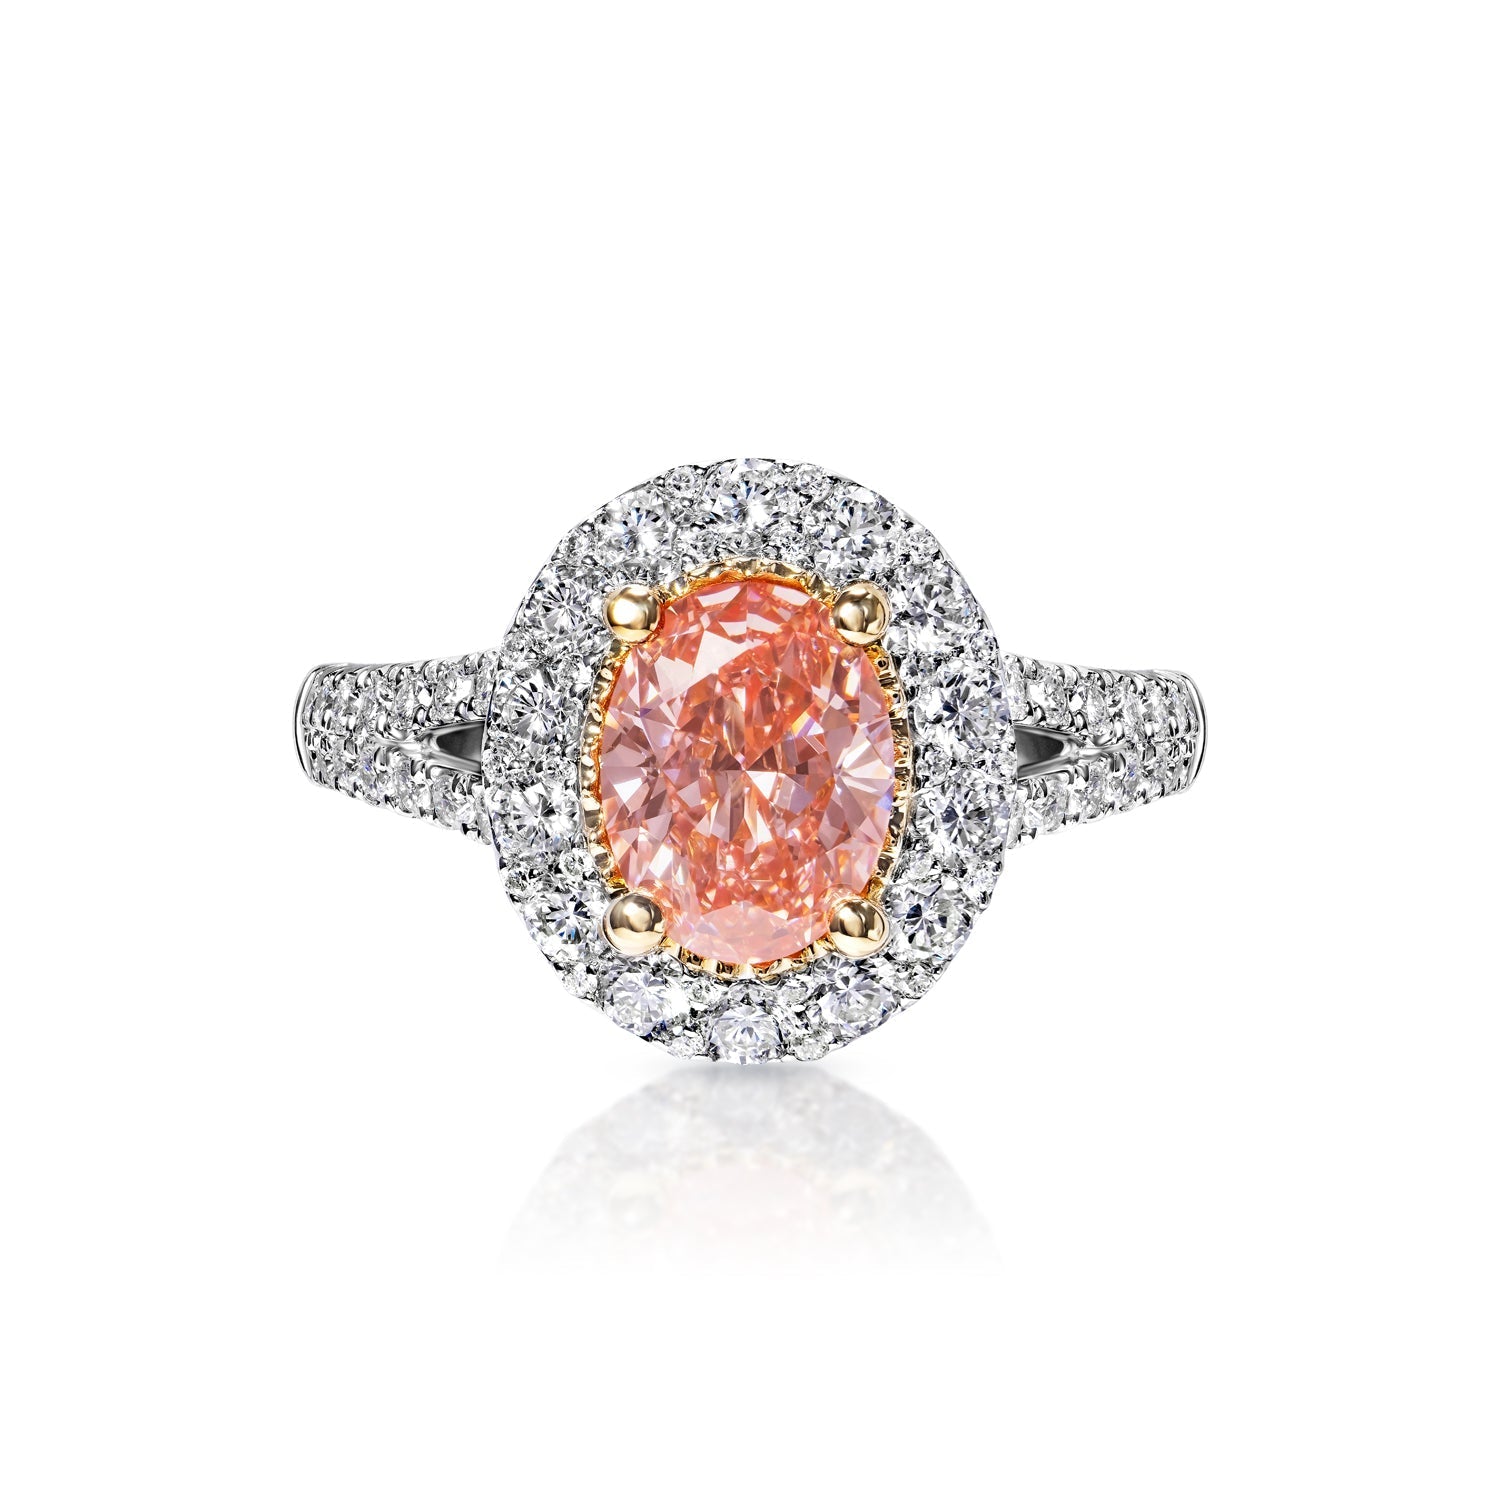 Why Nekta New York's Pink Diamond Engagement Ring are the Best to Give Your Beloved